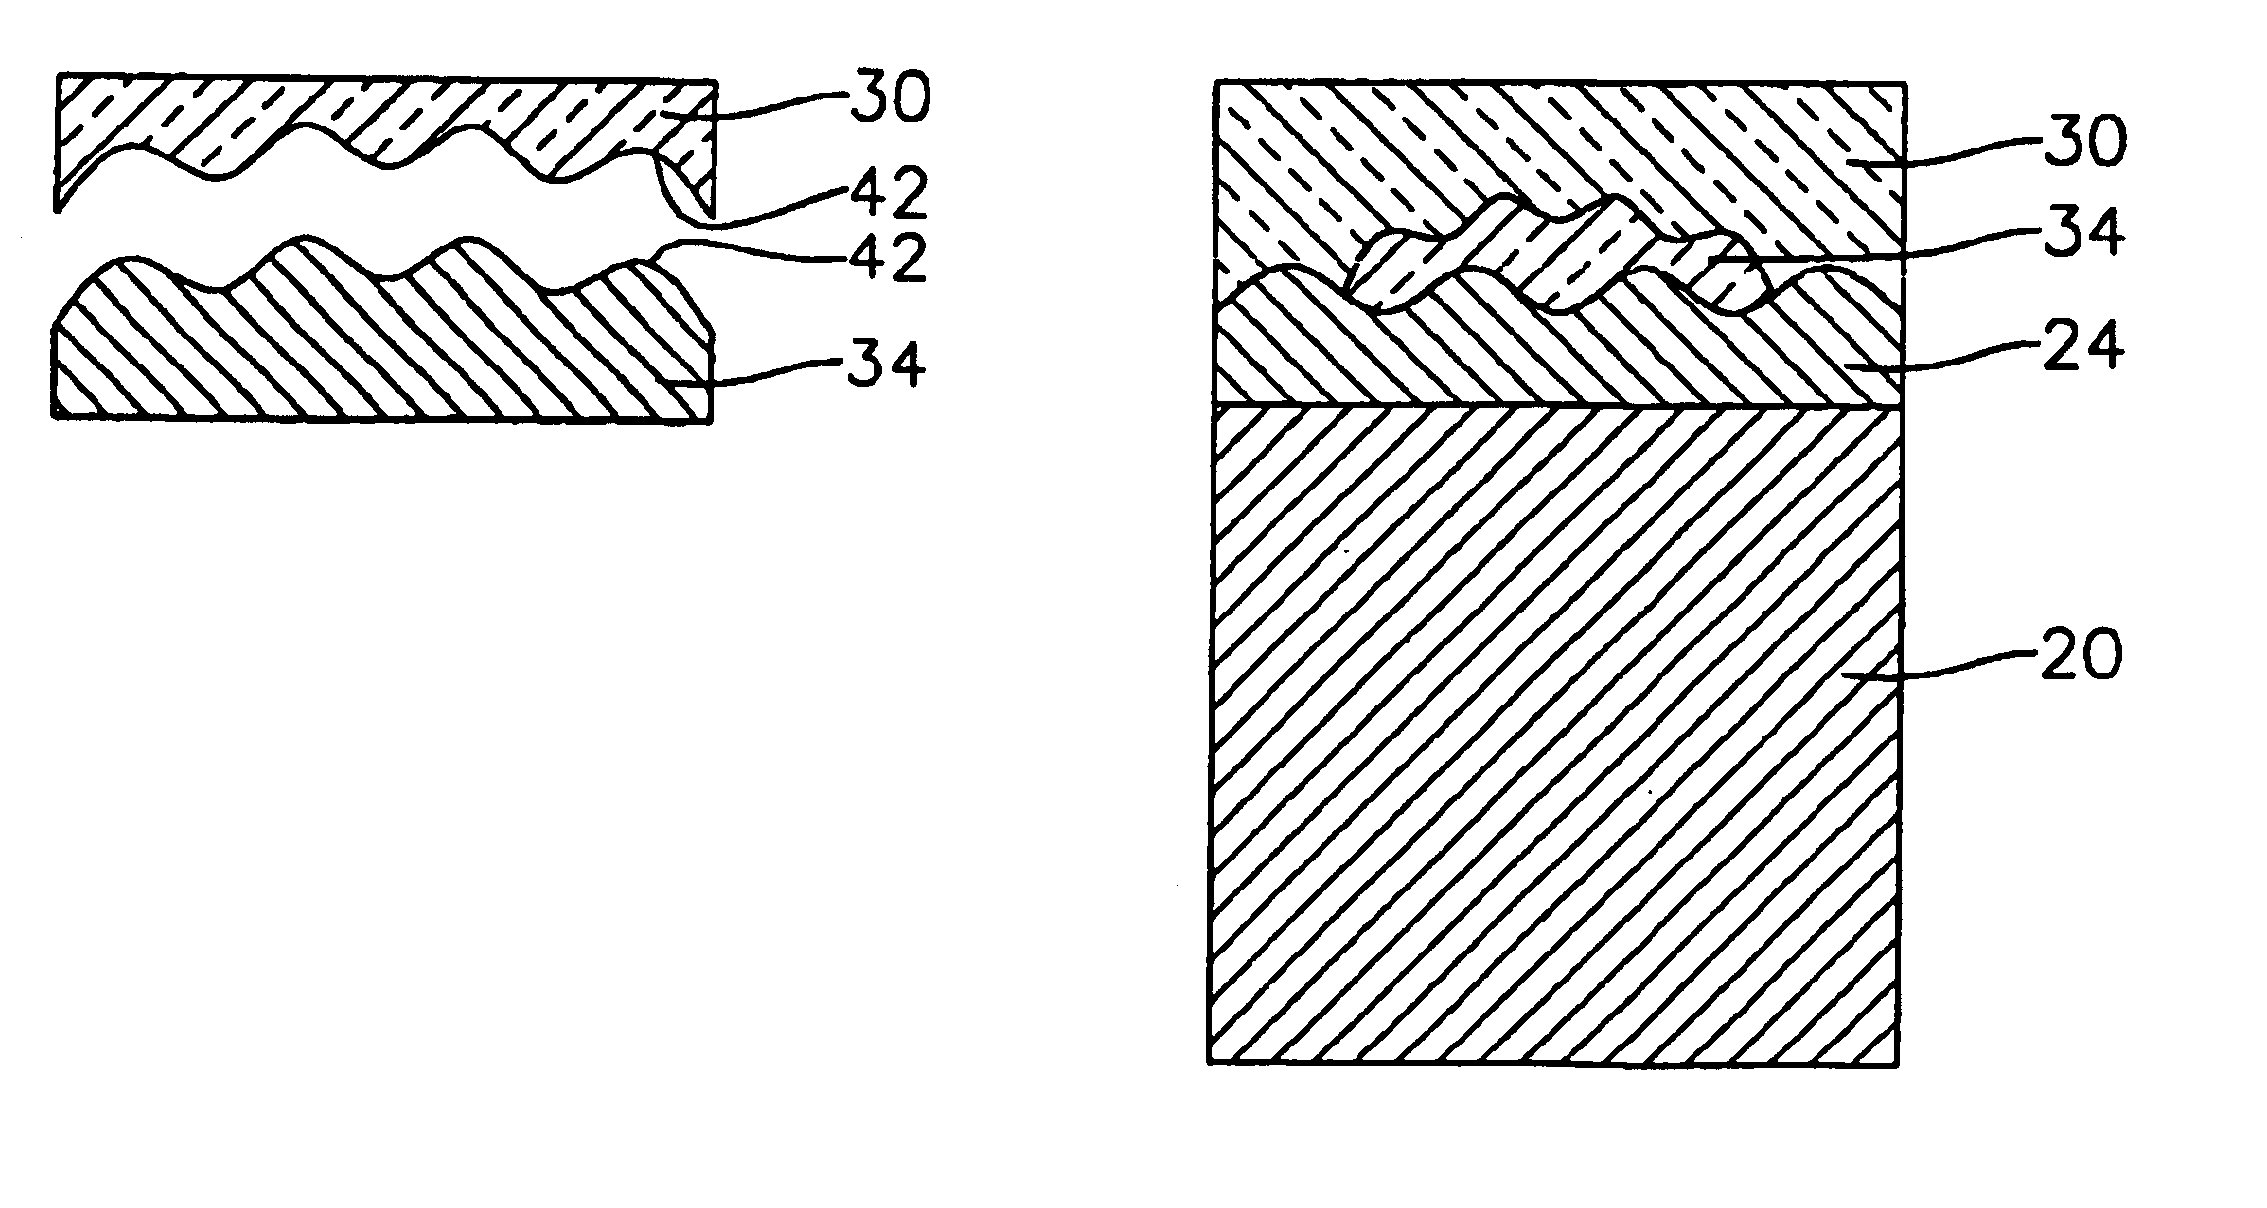 Cutting element having a substrate, a transition layer and an ultra hard material layer